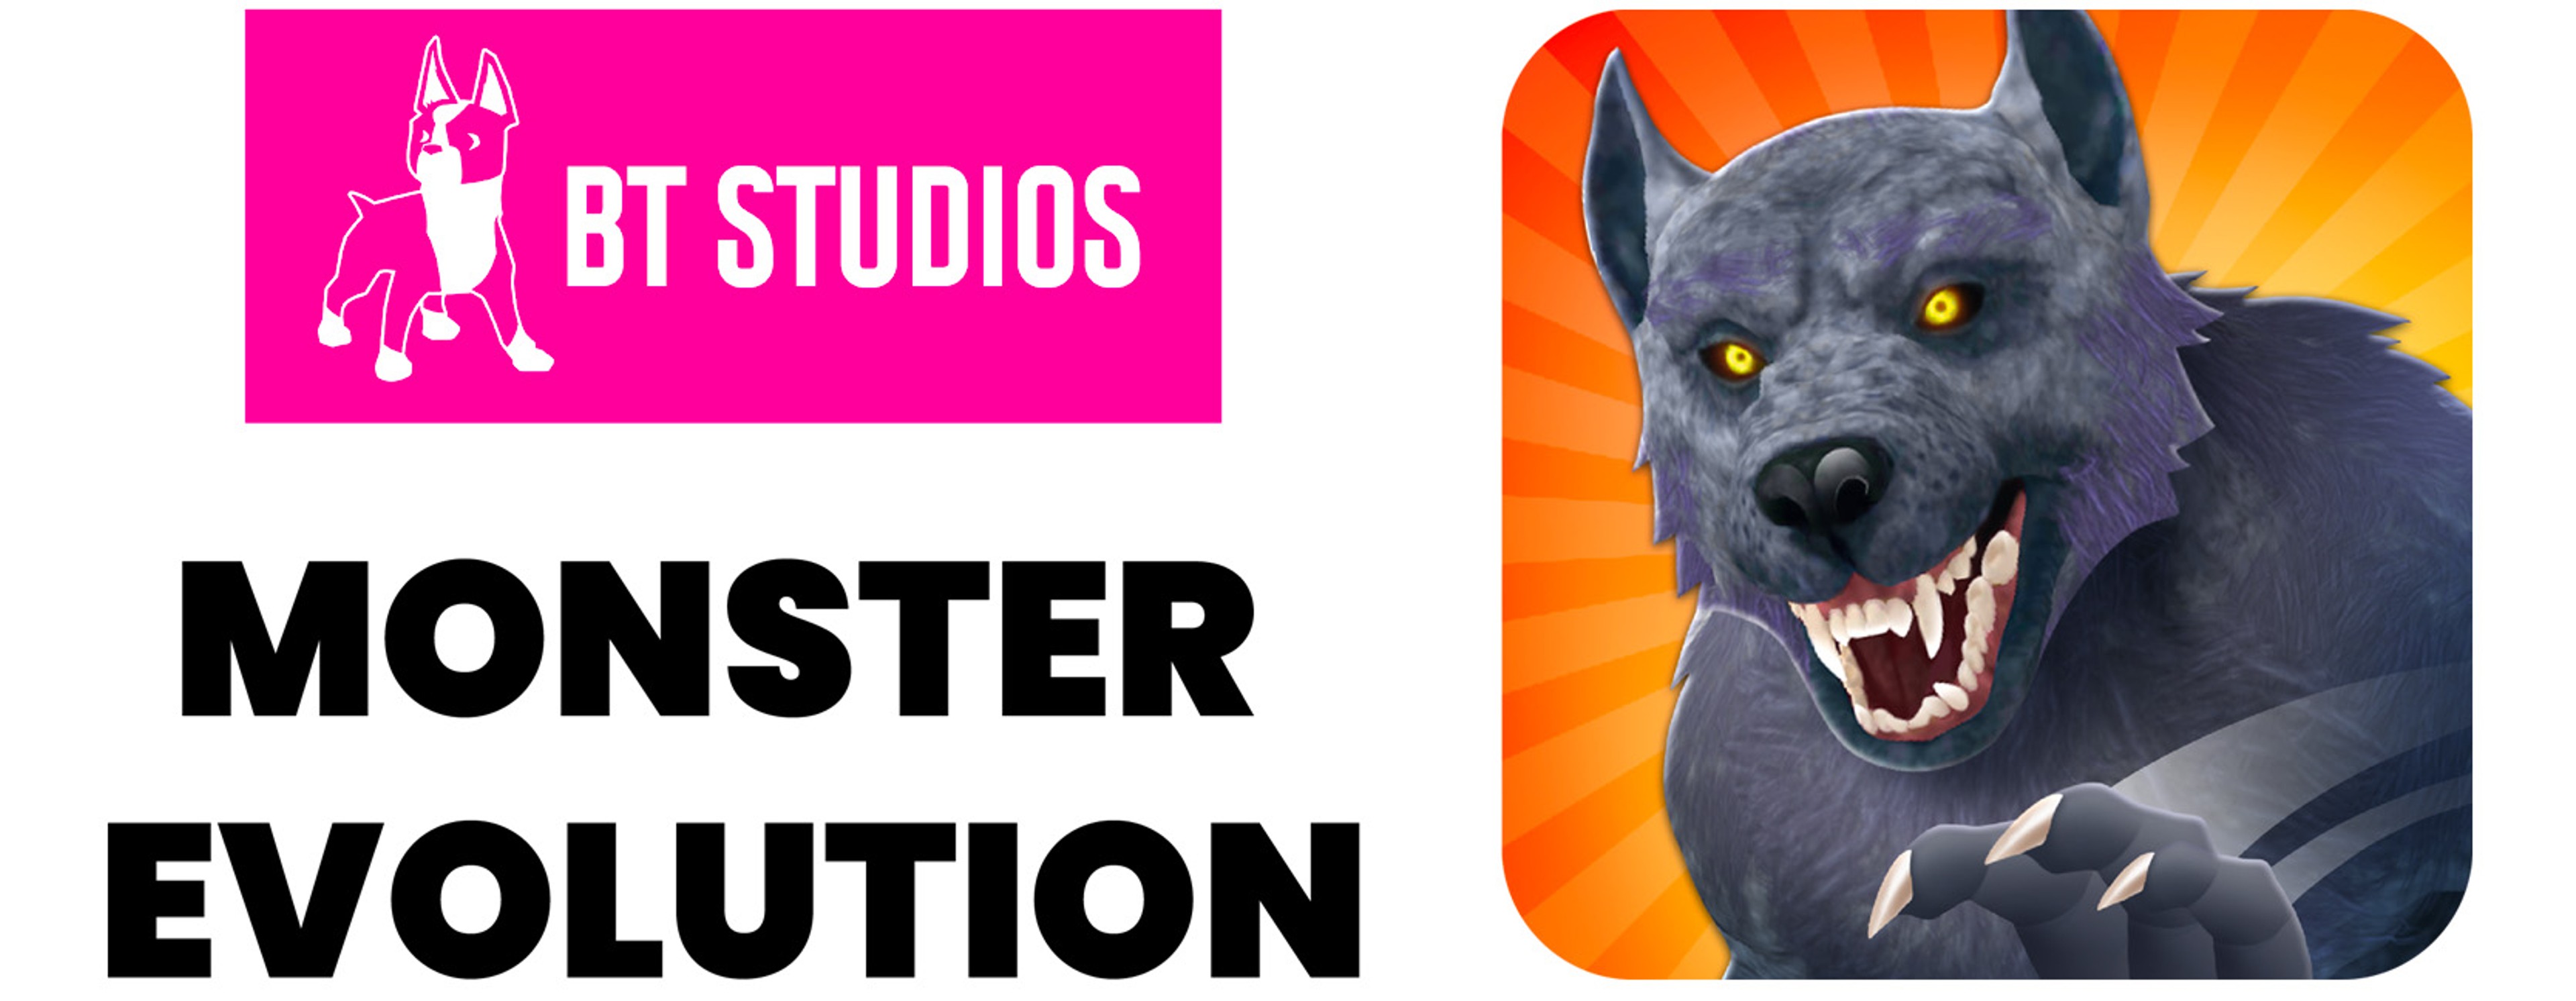 Monster Evolution - Homa and BT Studios Hypercasual Game